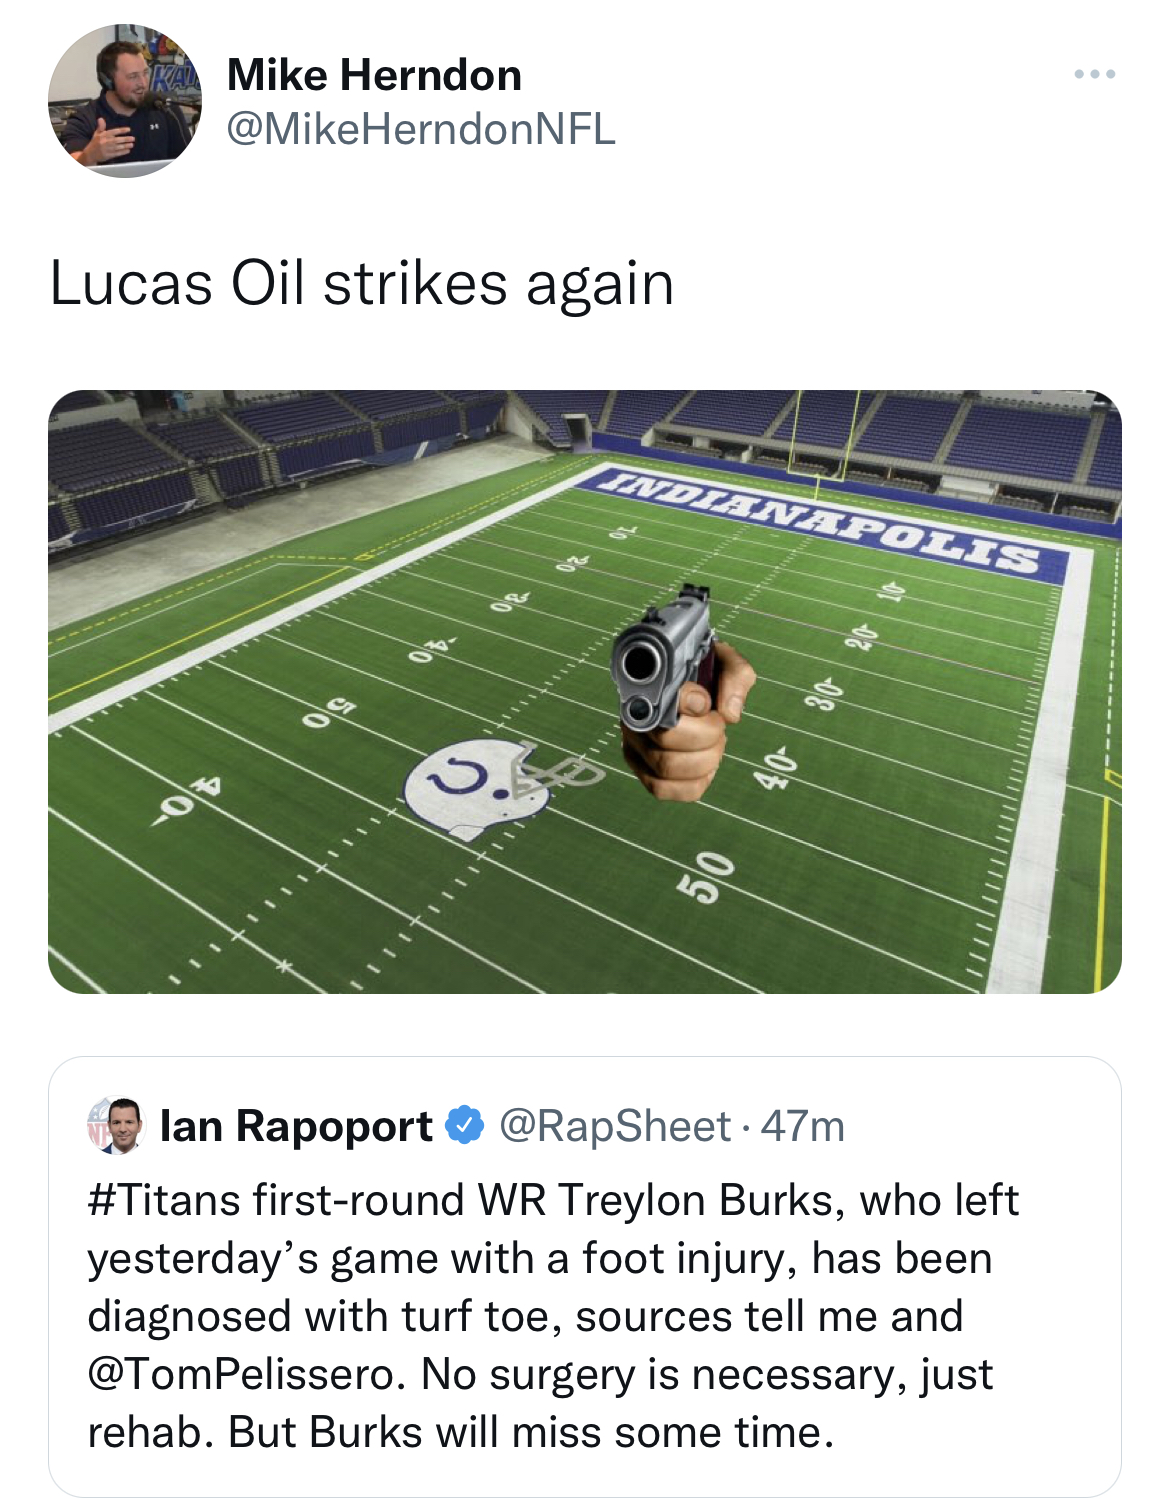 nfl memes - player - Mike Herndon Lucas Oil strikes again Indianapolis 50 40 lan Rapoport firstround Wr Treylon Burks, who left yesterday's game with a foot injury, has been diagnosed with turf toe, sources tell me and . No surgery is necessary, just reha